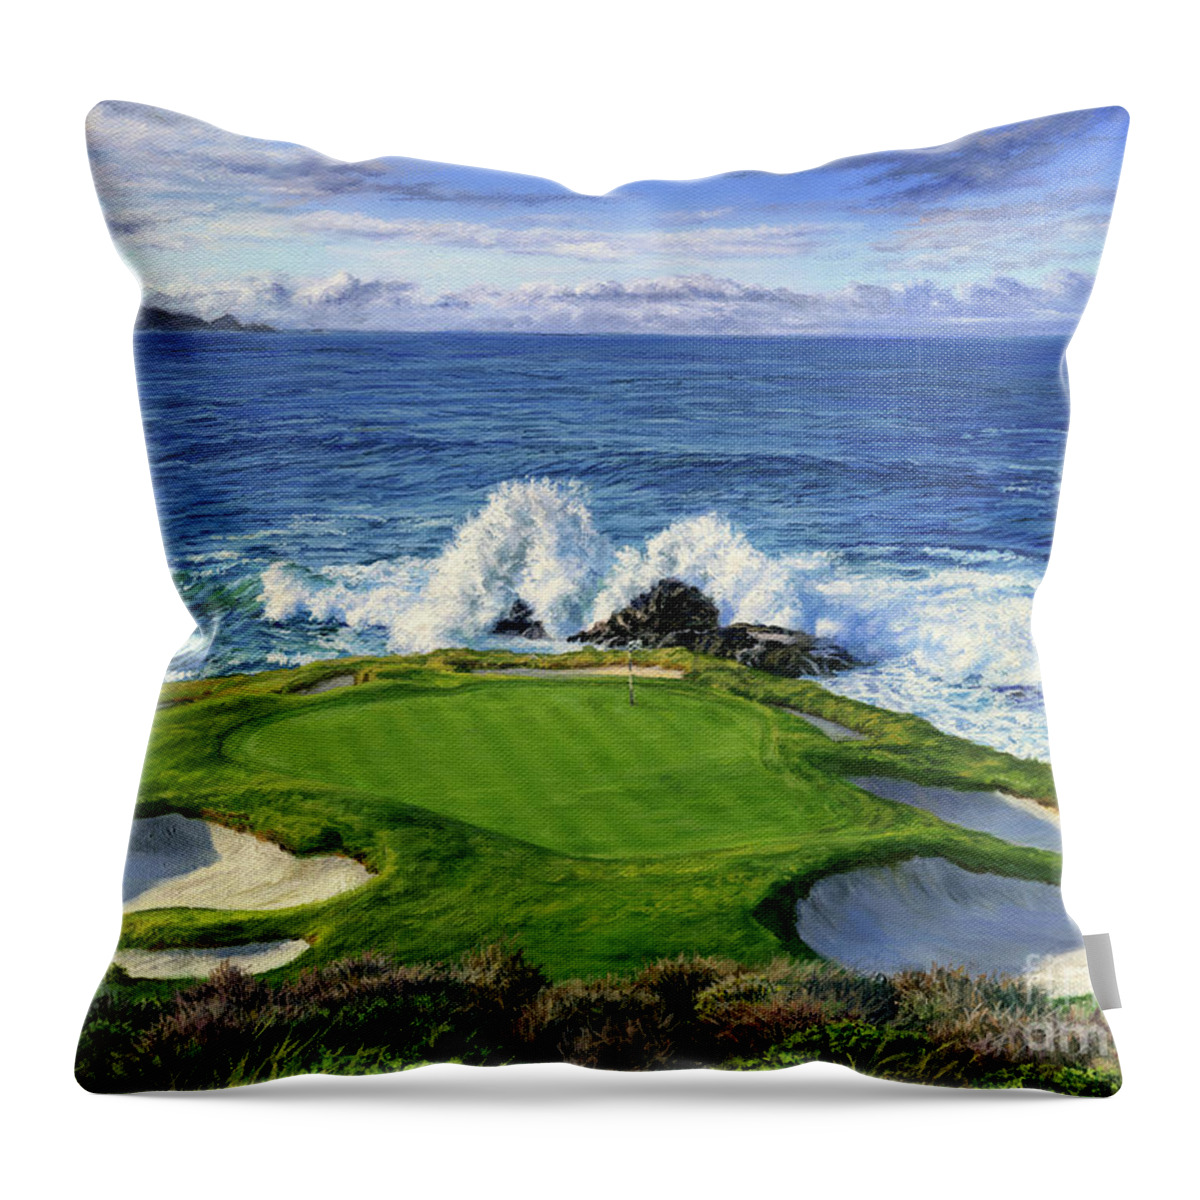 Pebble Beach Throw Pillow featuring the painting Pebble Beach by Steph Moraca